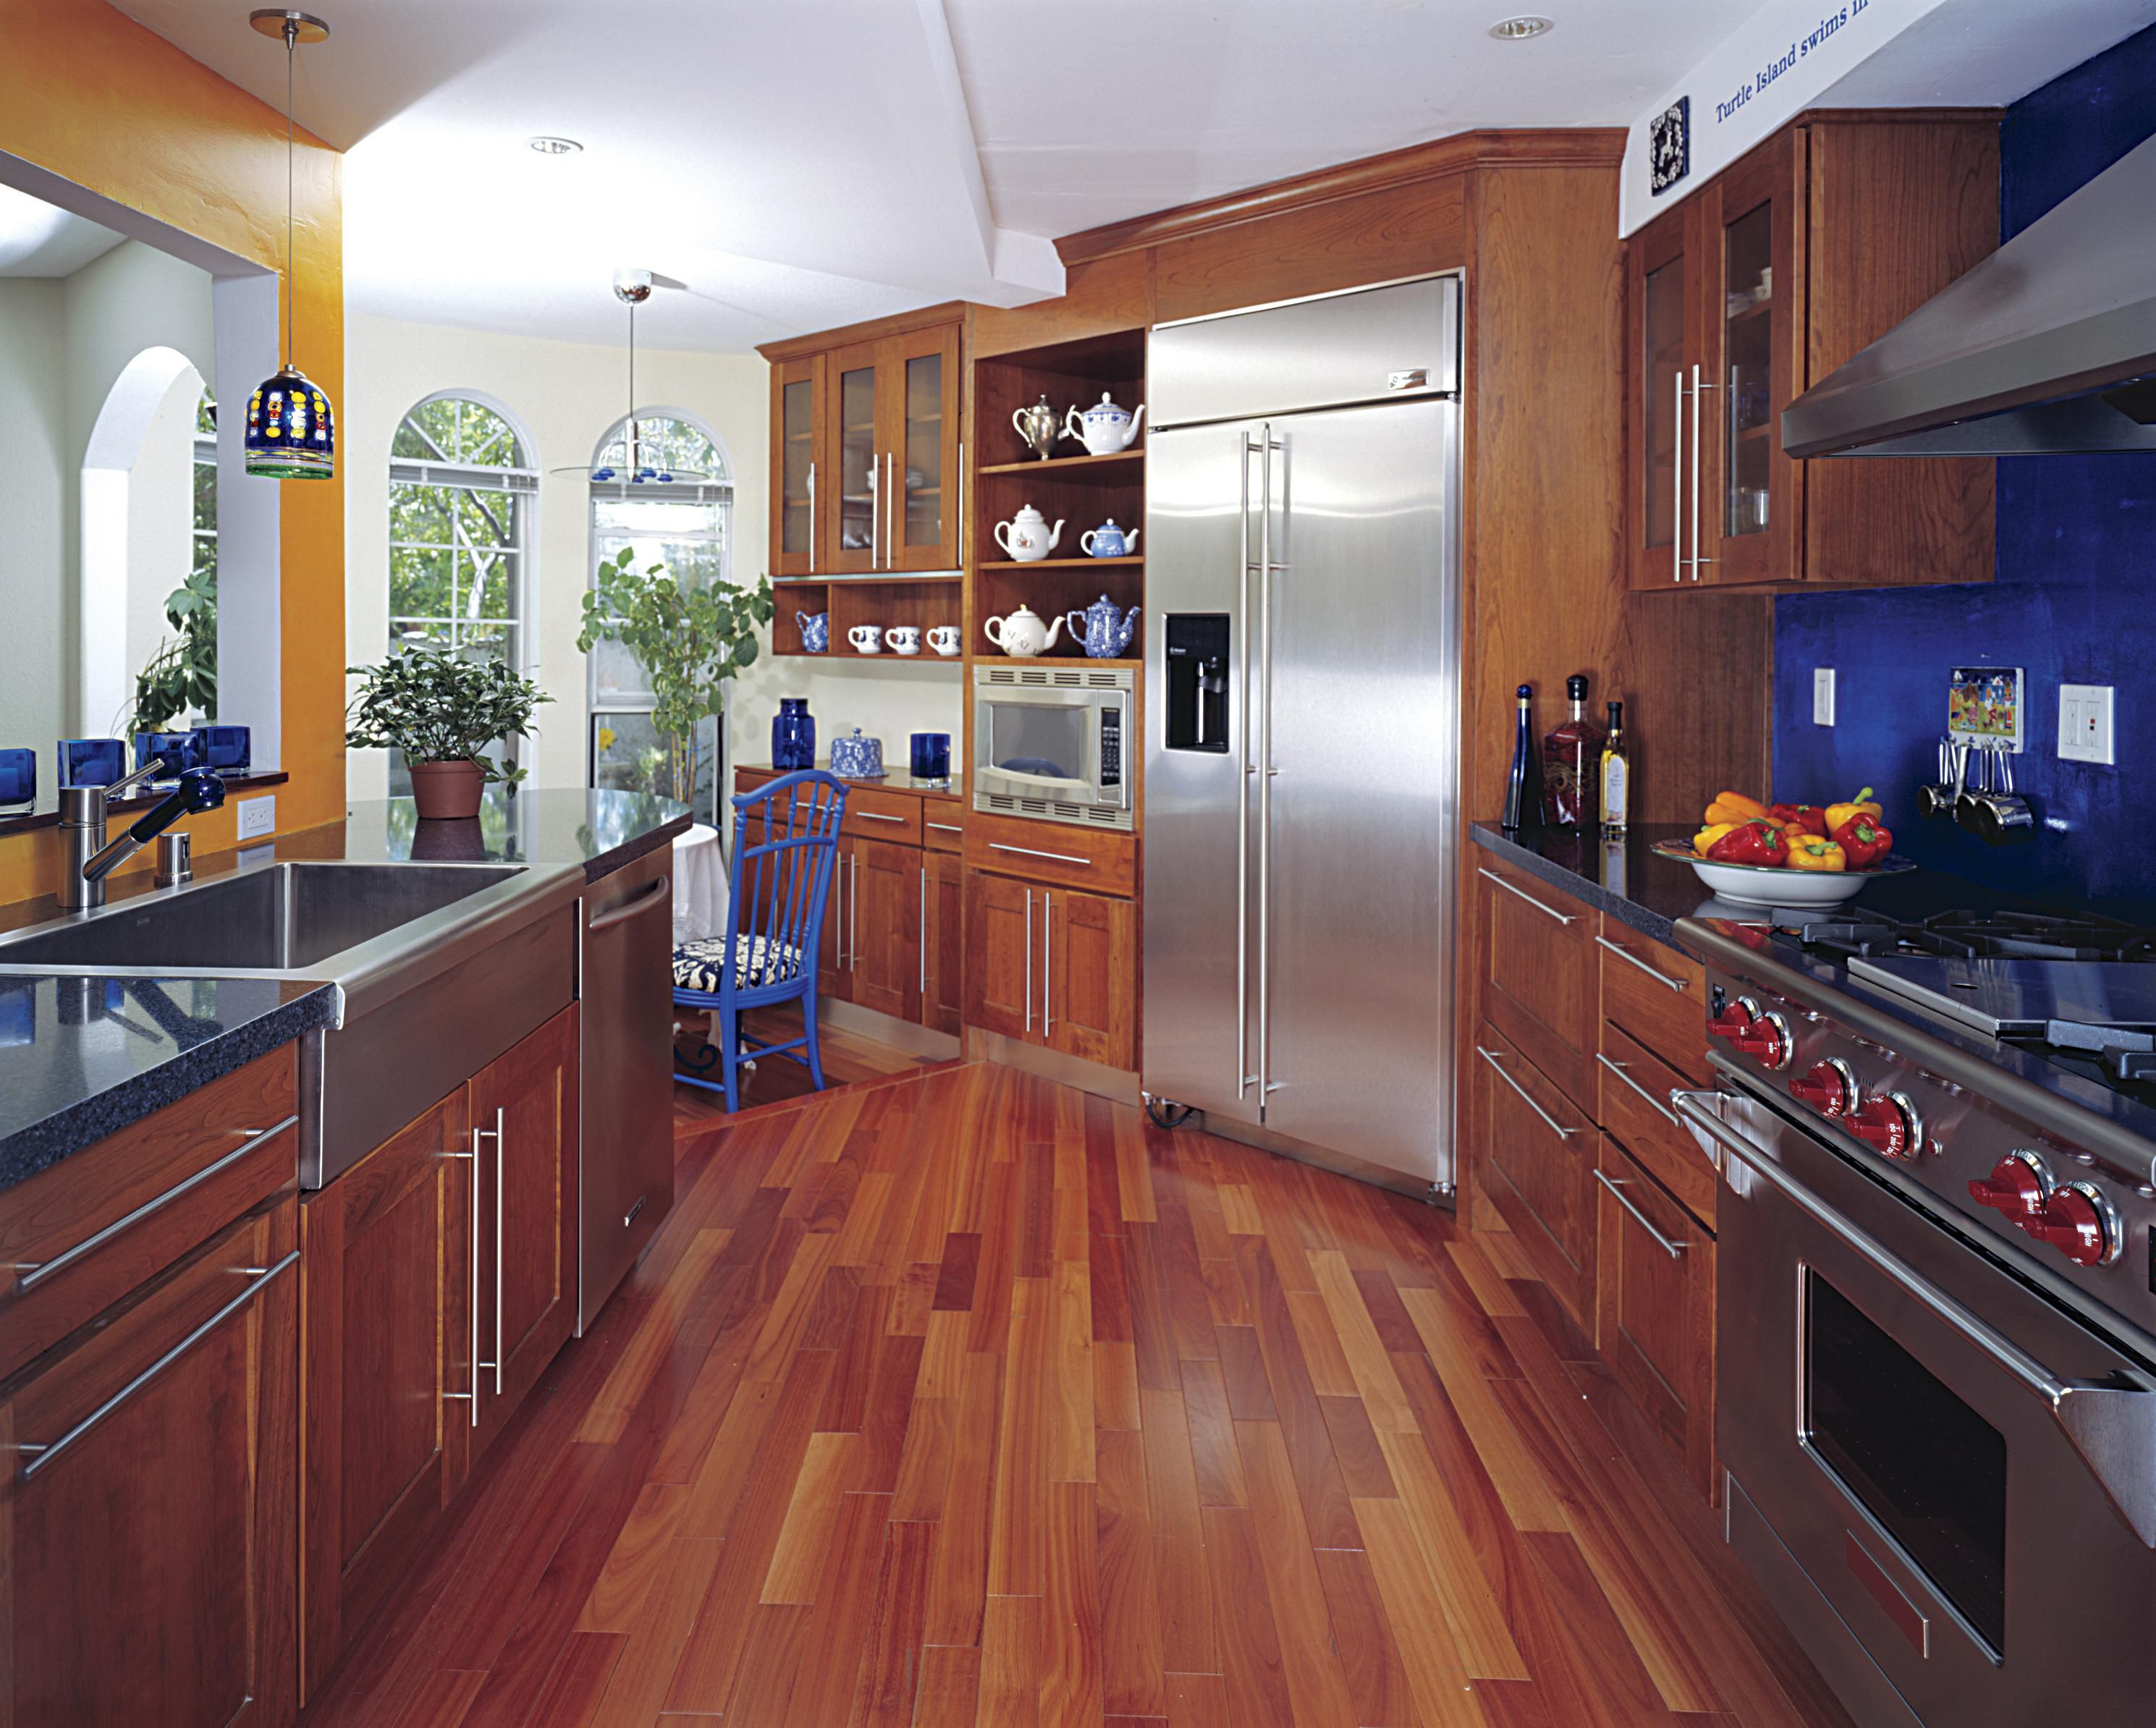 26 Best Birch Hardwood Flooring Reviews 2024 free download birch hardwood flooring reviews of hardwood floor in a kitchen is this allowed inside 186828472 56a49f3a5f9b58b7d0d7e142